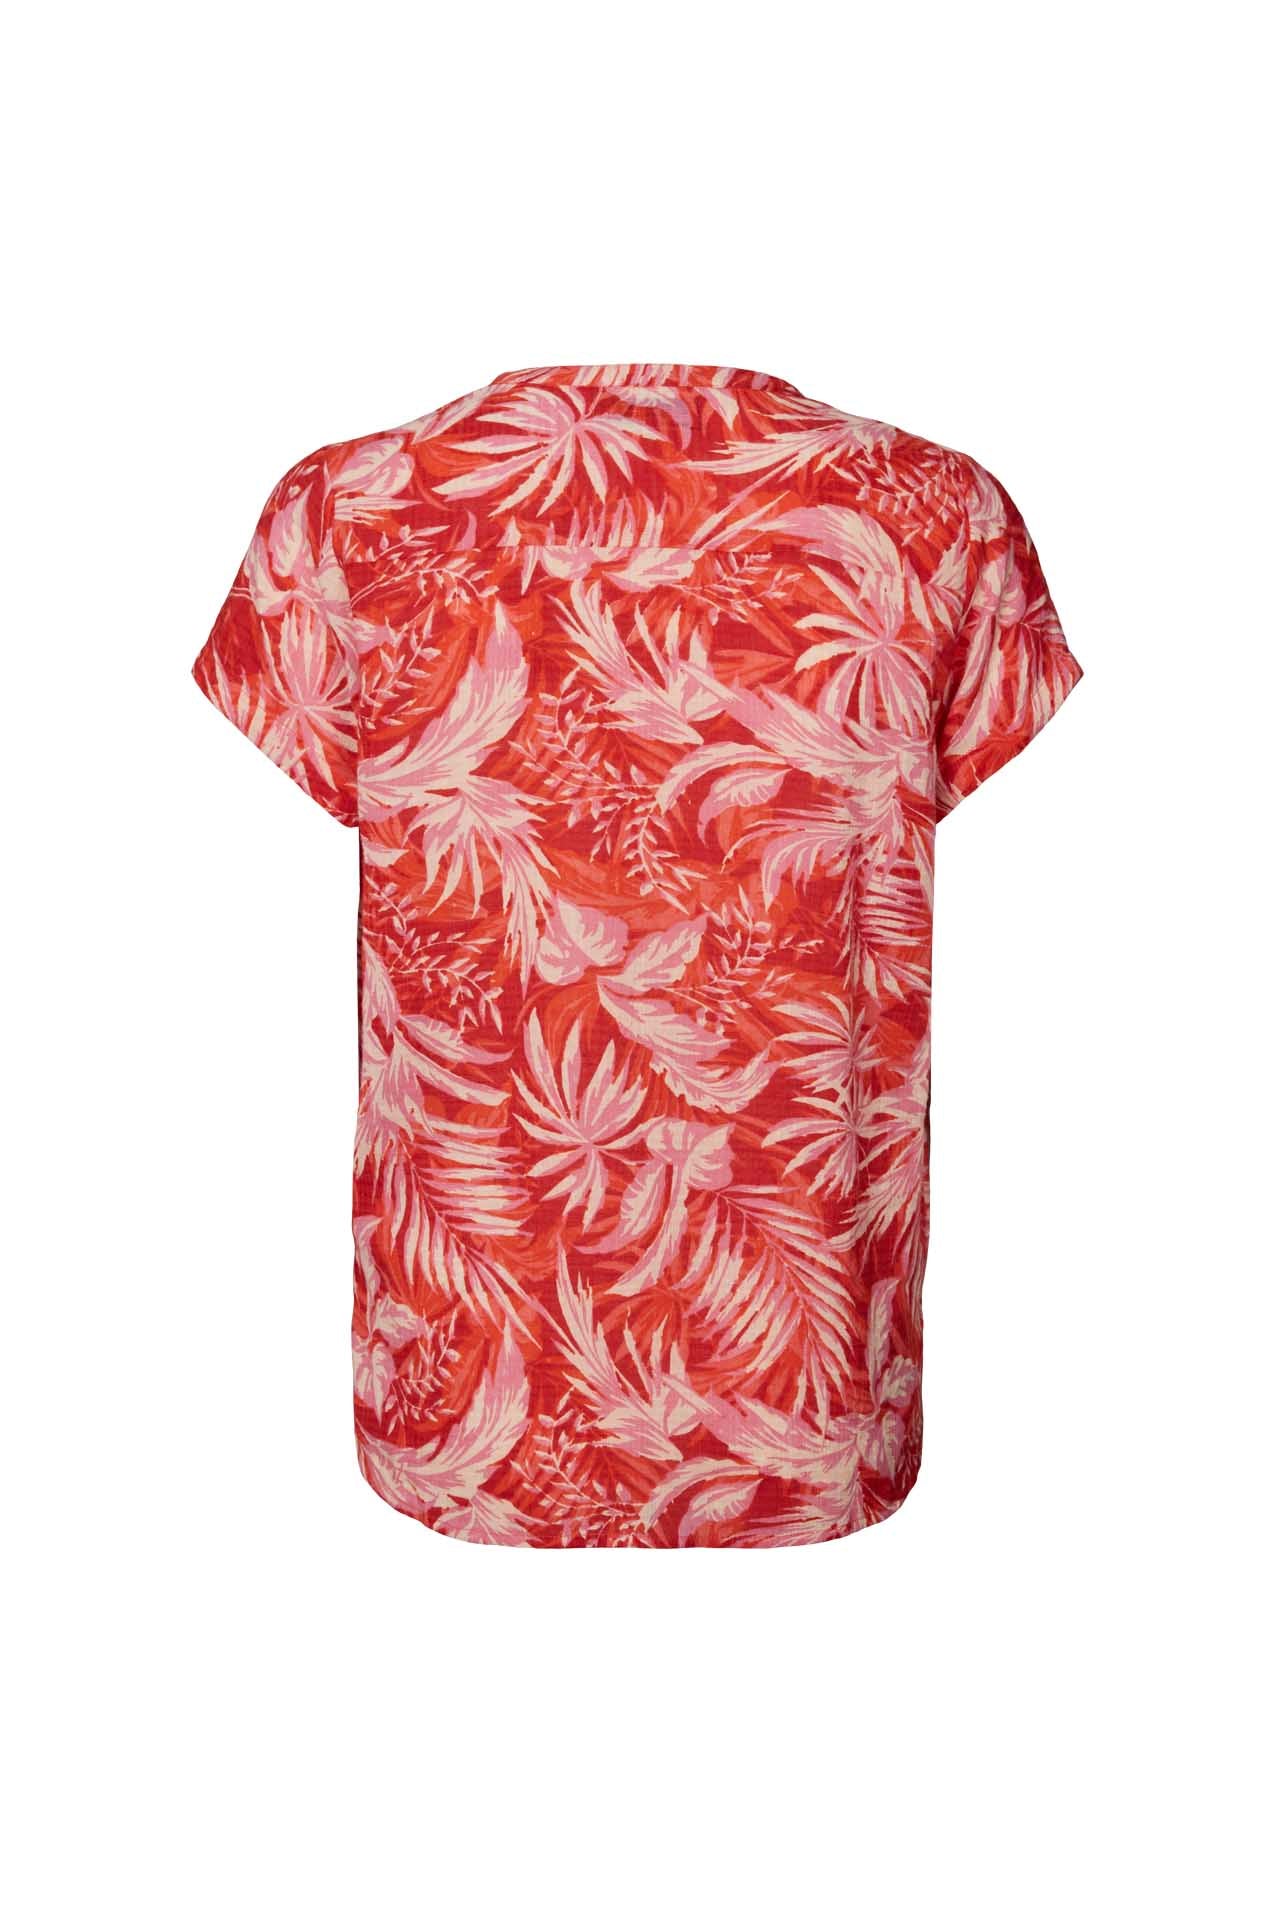 Lollys Laundry Heather Top Top 30 Red